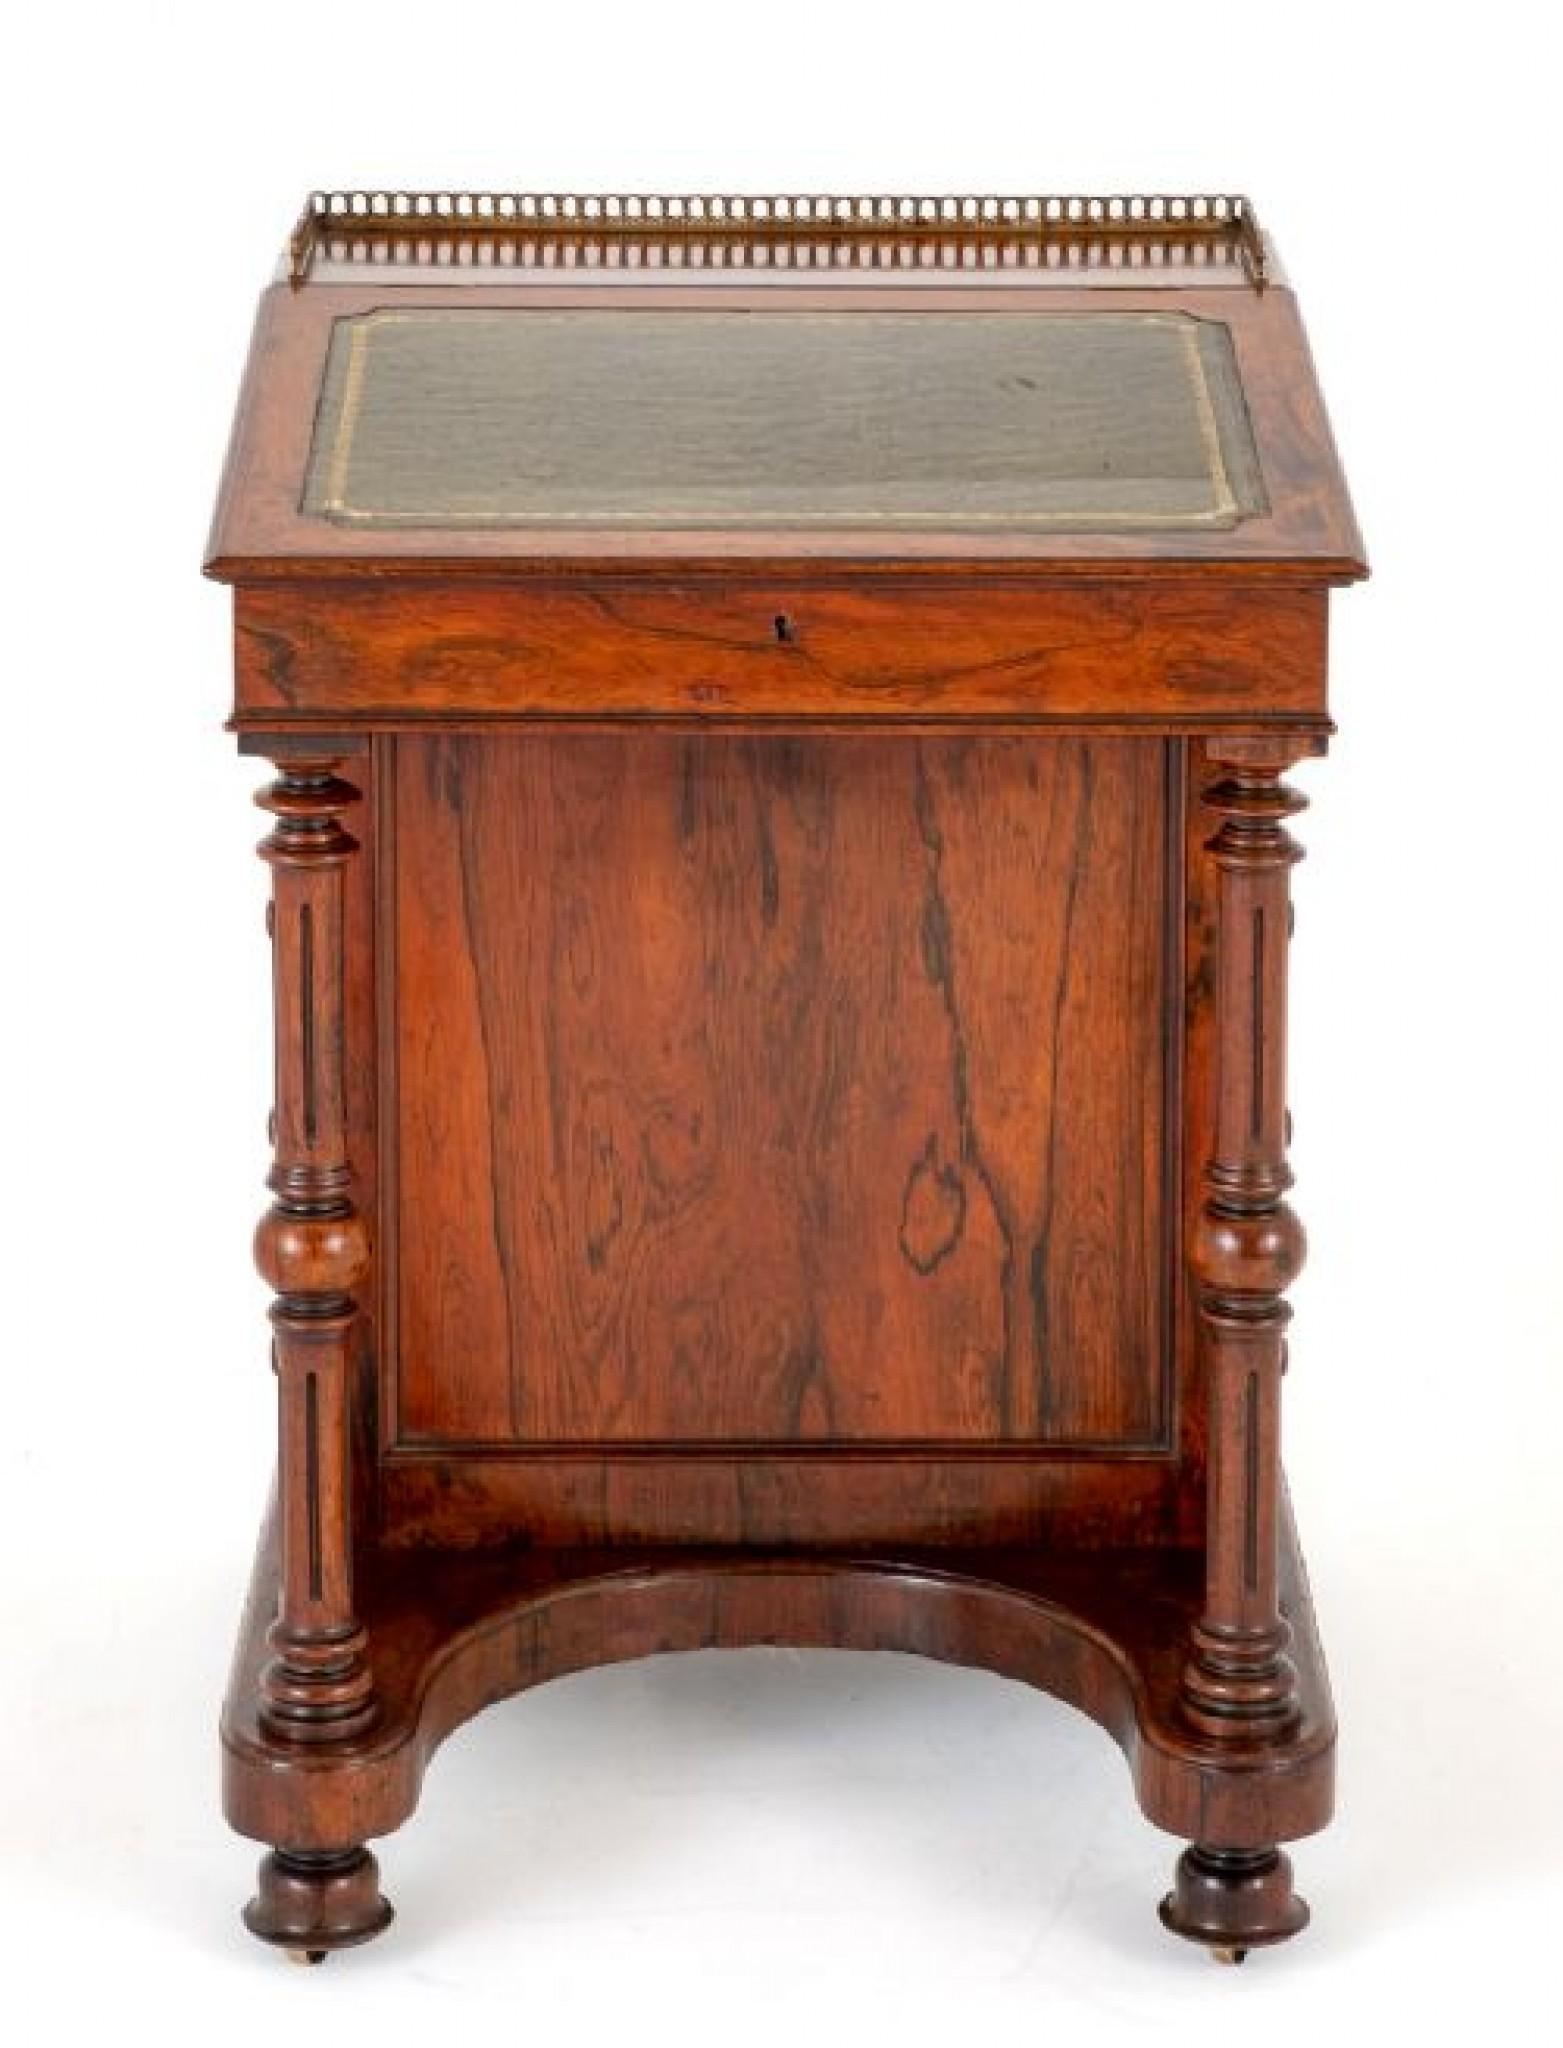 Victorian Davenport Desk Antique, 1850 In Good Condition For Sale In Potters Bar, GB